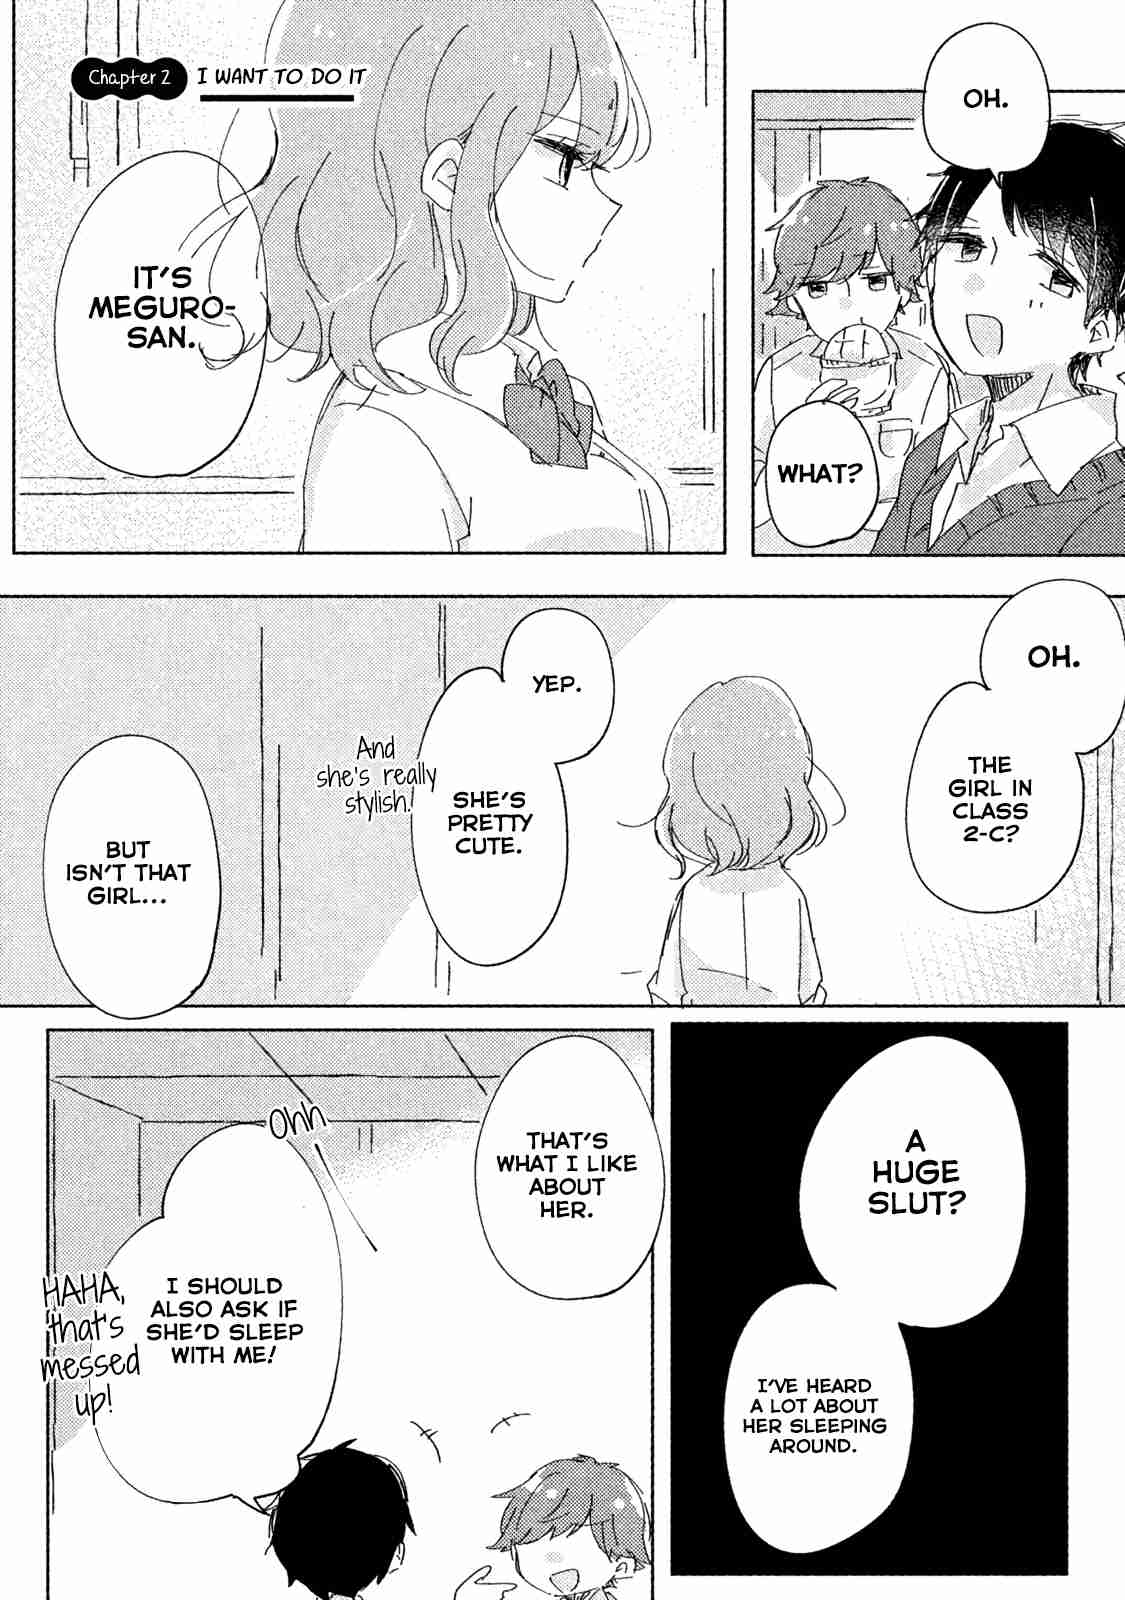 It's Not Meguro san's First Time Vol. 1 Ch. 2 I Want To Do It